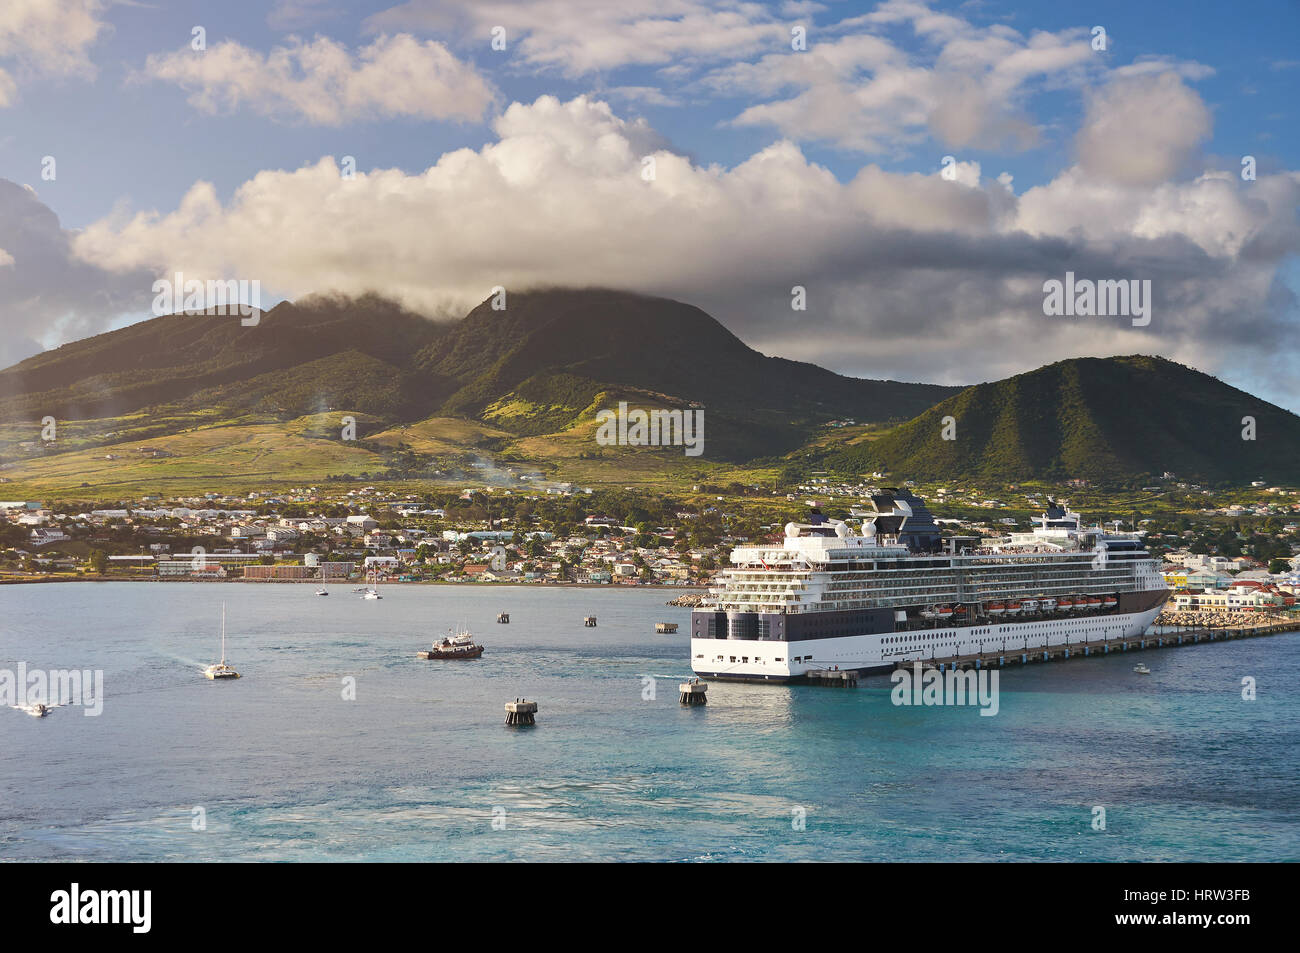 Port in caribbean island St Kitts sunny day time. Cruise ship docked on tropical island Stock Photo